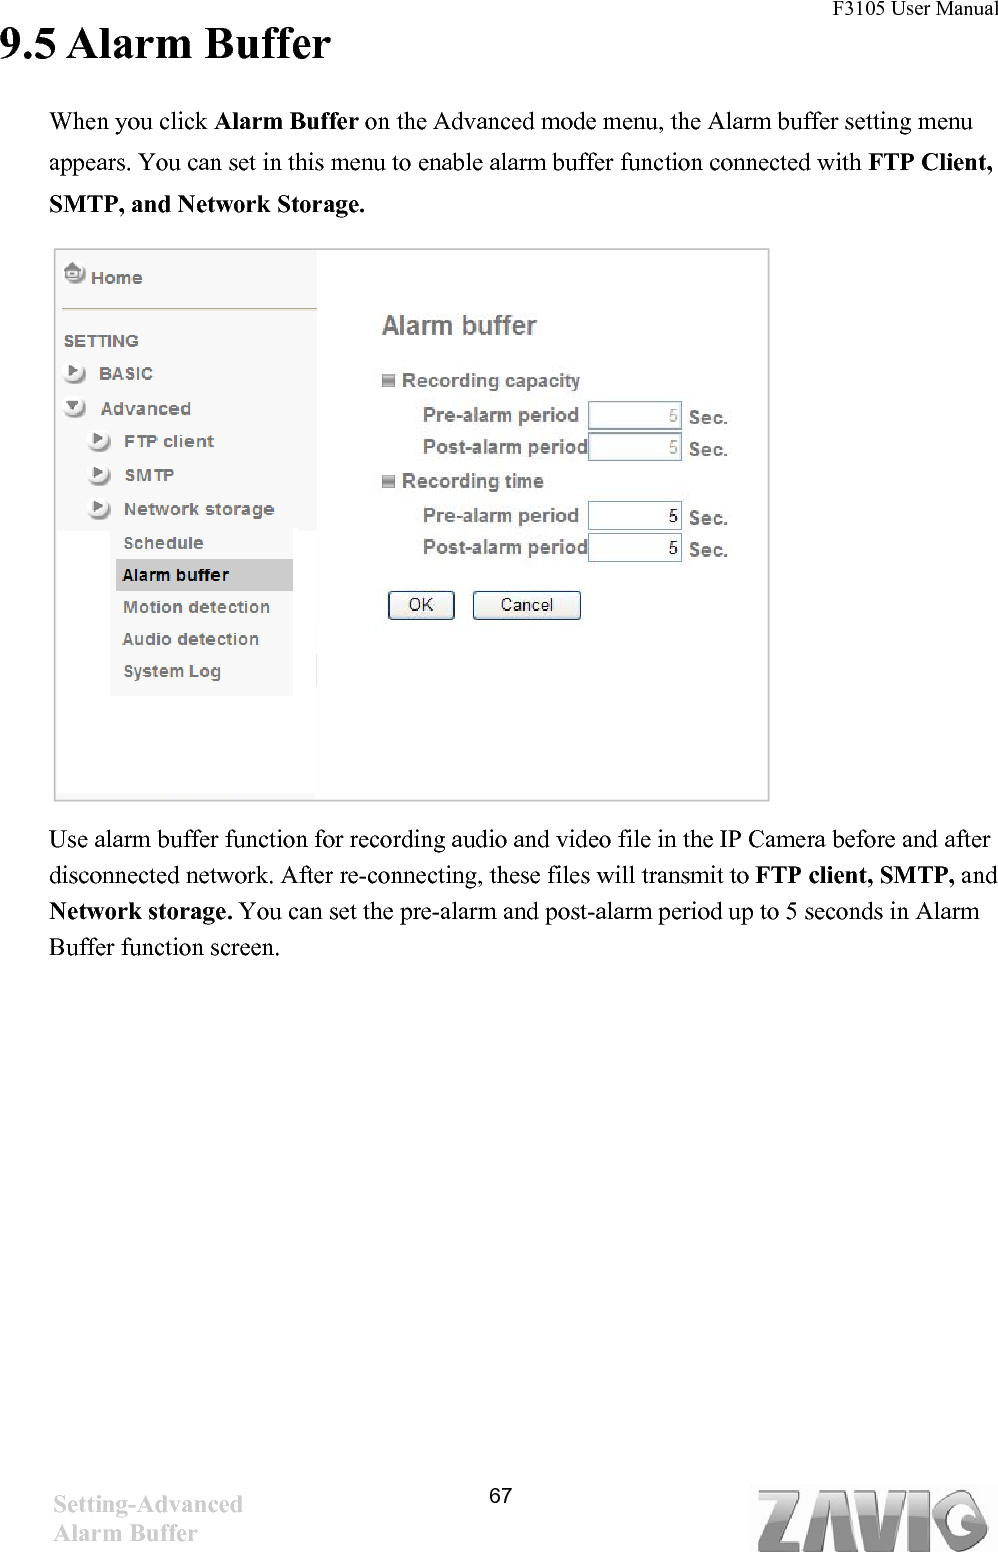 F3105 User Manual                                                                           9.5 Alarm Buffer    When you click Alarm Buffer on the Advanced mode menu, the Alarm buffer setting menu appears. You can set in this menu to enable alarm buffer function connected with FTP Client, SMTP, and Network Storage.                       Use alarm buffer function for recording audio and video file in the IP Camera before and after disconnected network. After re-connecting, these files will transmit to FTP client, SMTP, and Network storage. You can set the pre-alarm and post-alarm period up to 5 seconds in Alarm Buffer function screen.                  Setting-Advanced Alarm Buffer   67